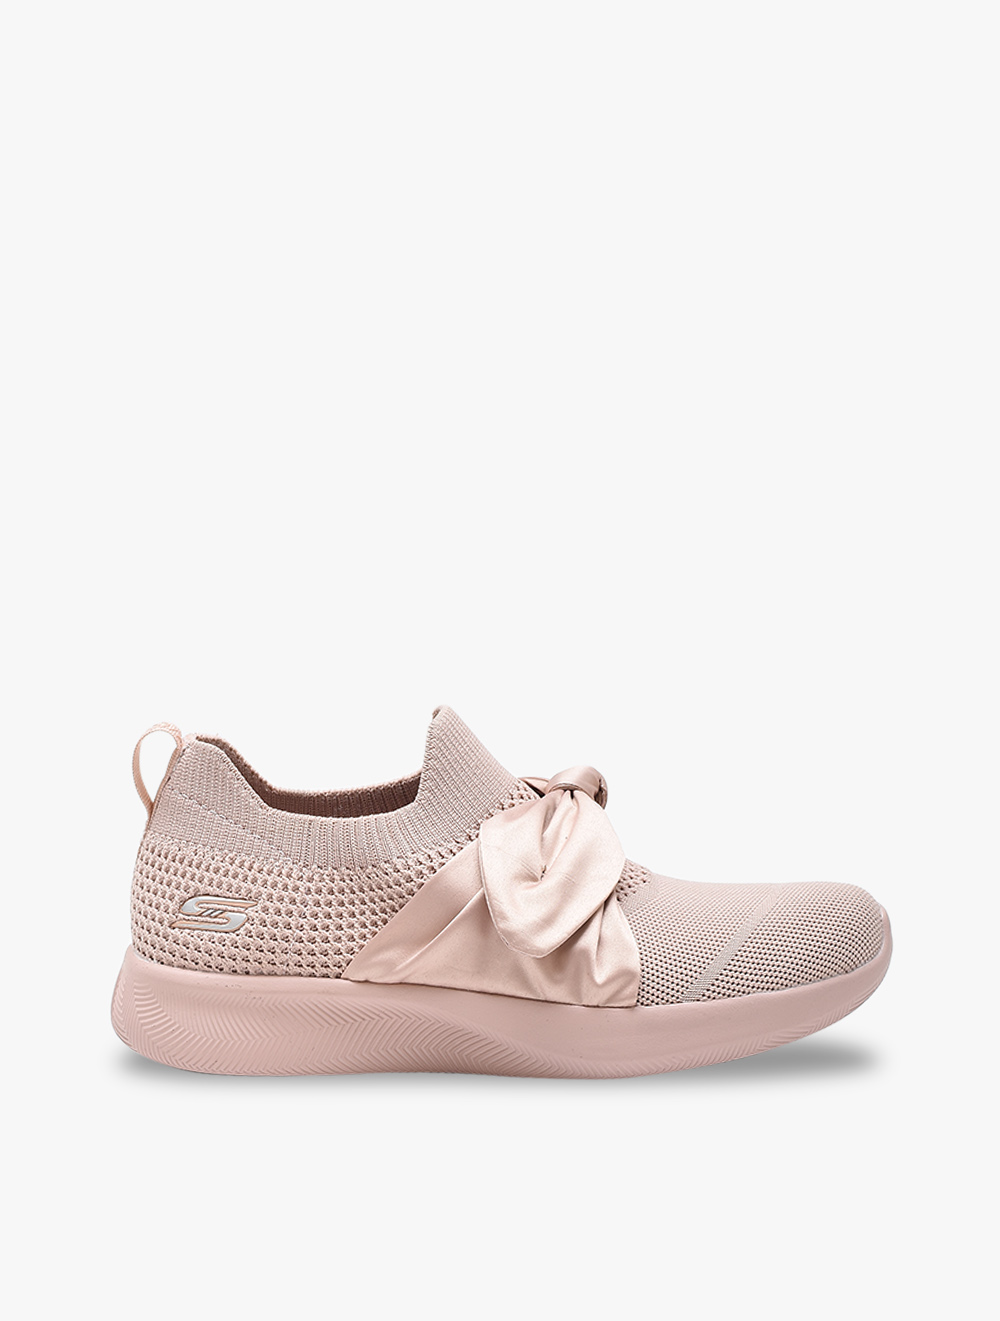 pink skechers with bow